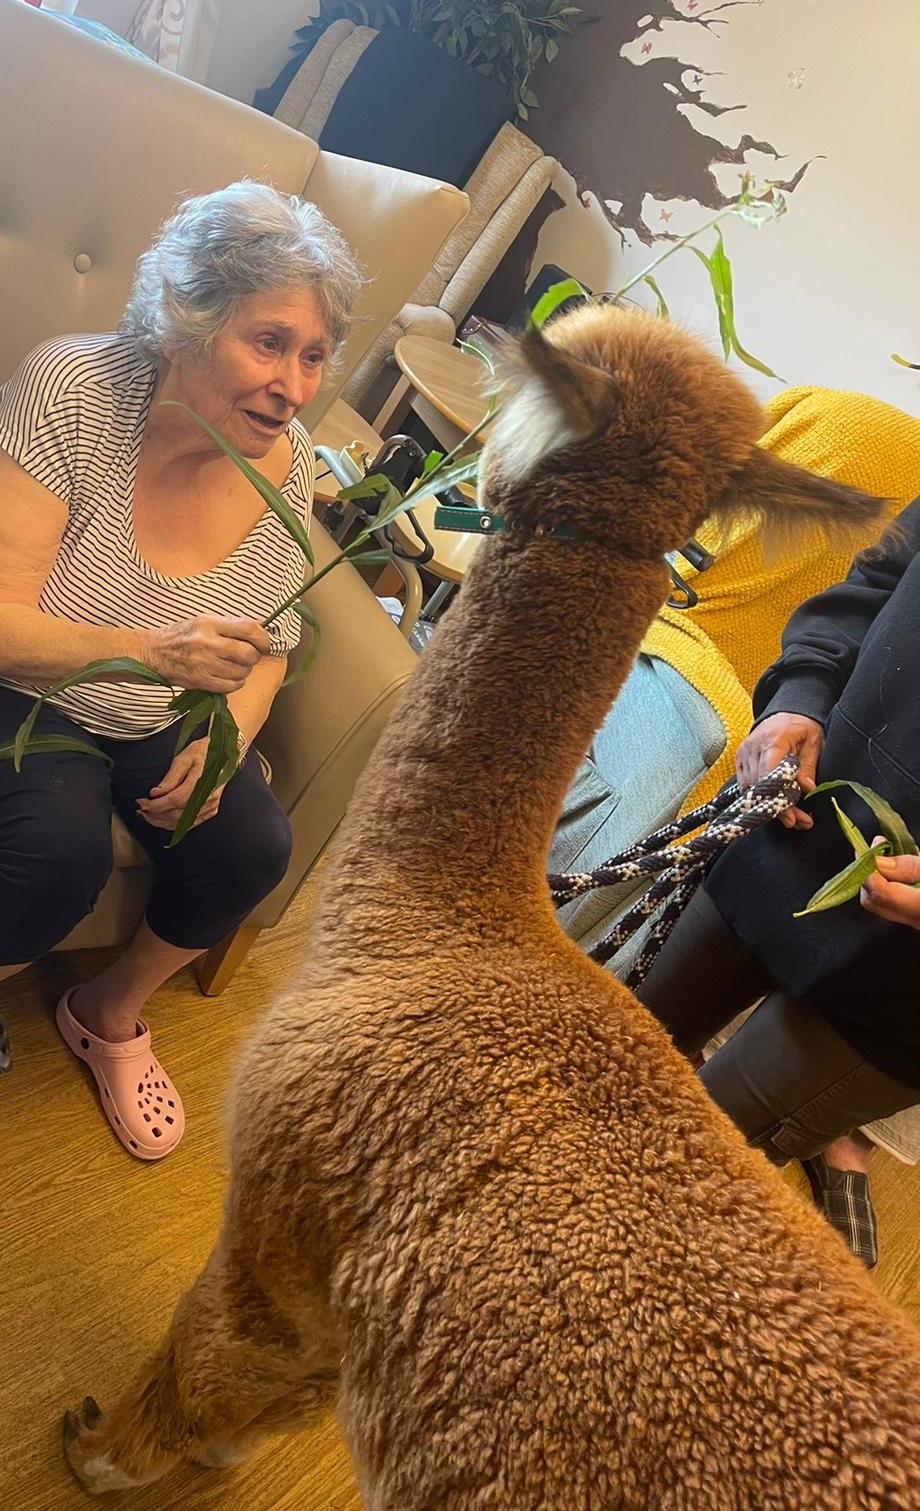 A woman seated feeding a brown alpaca willow branches